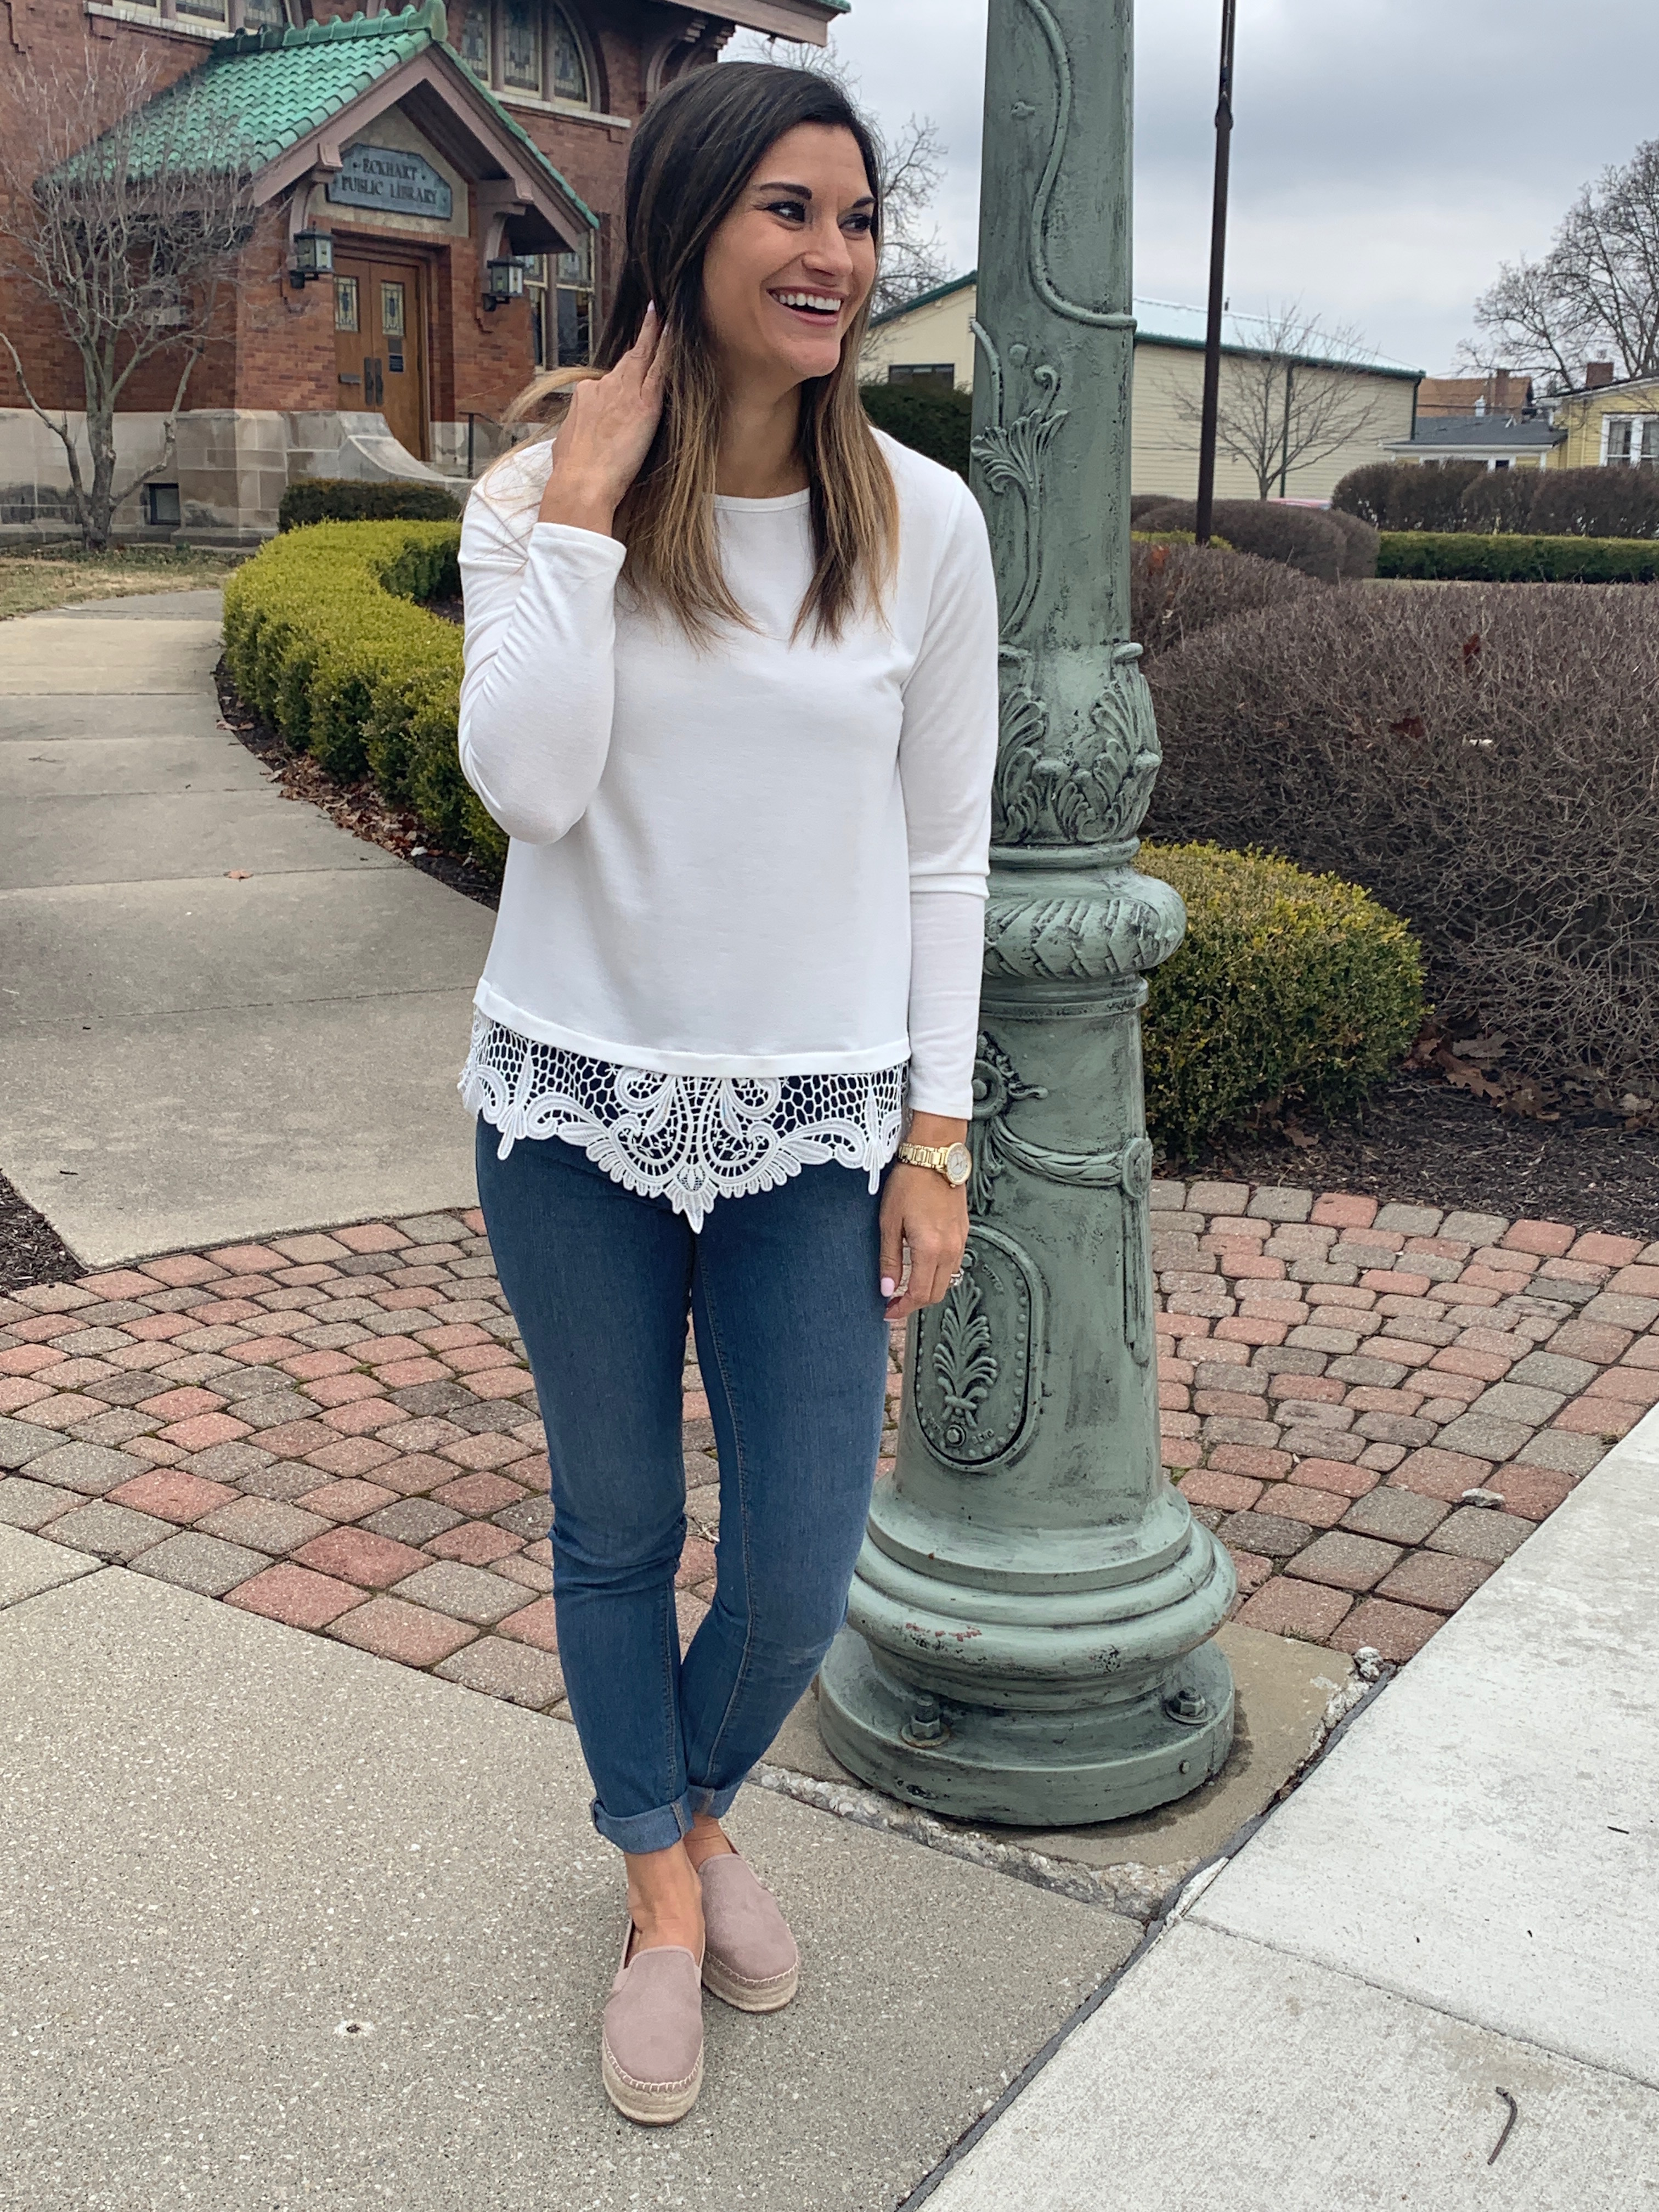 How to Wear One White Lace Top Five Ways – Just Posted